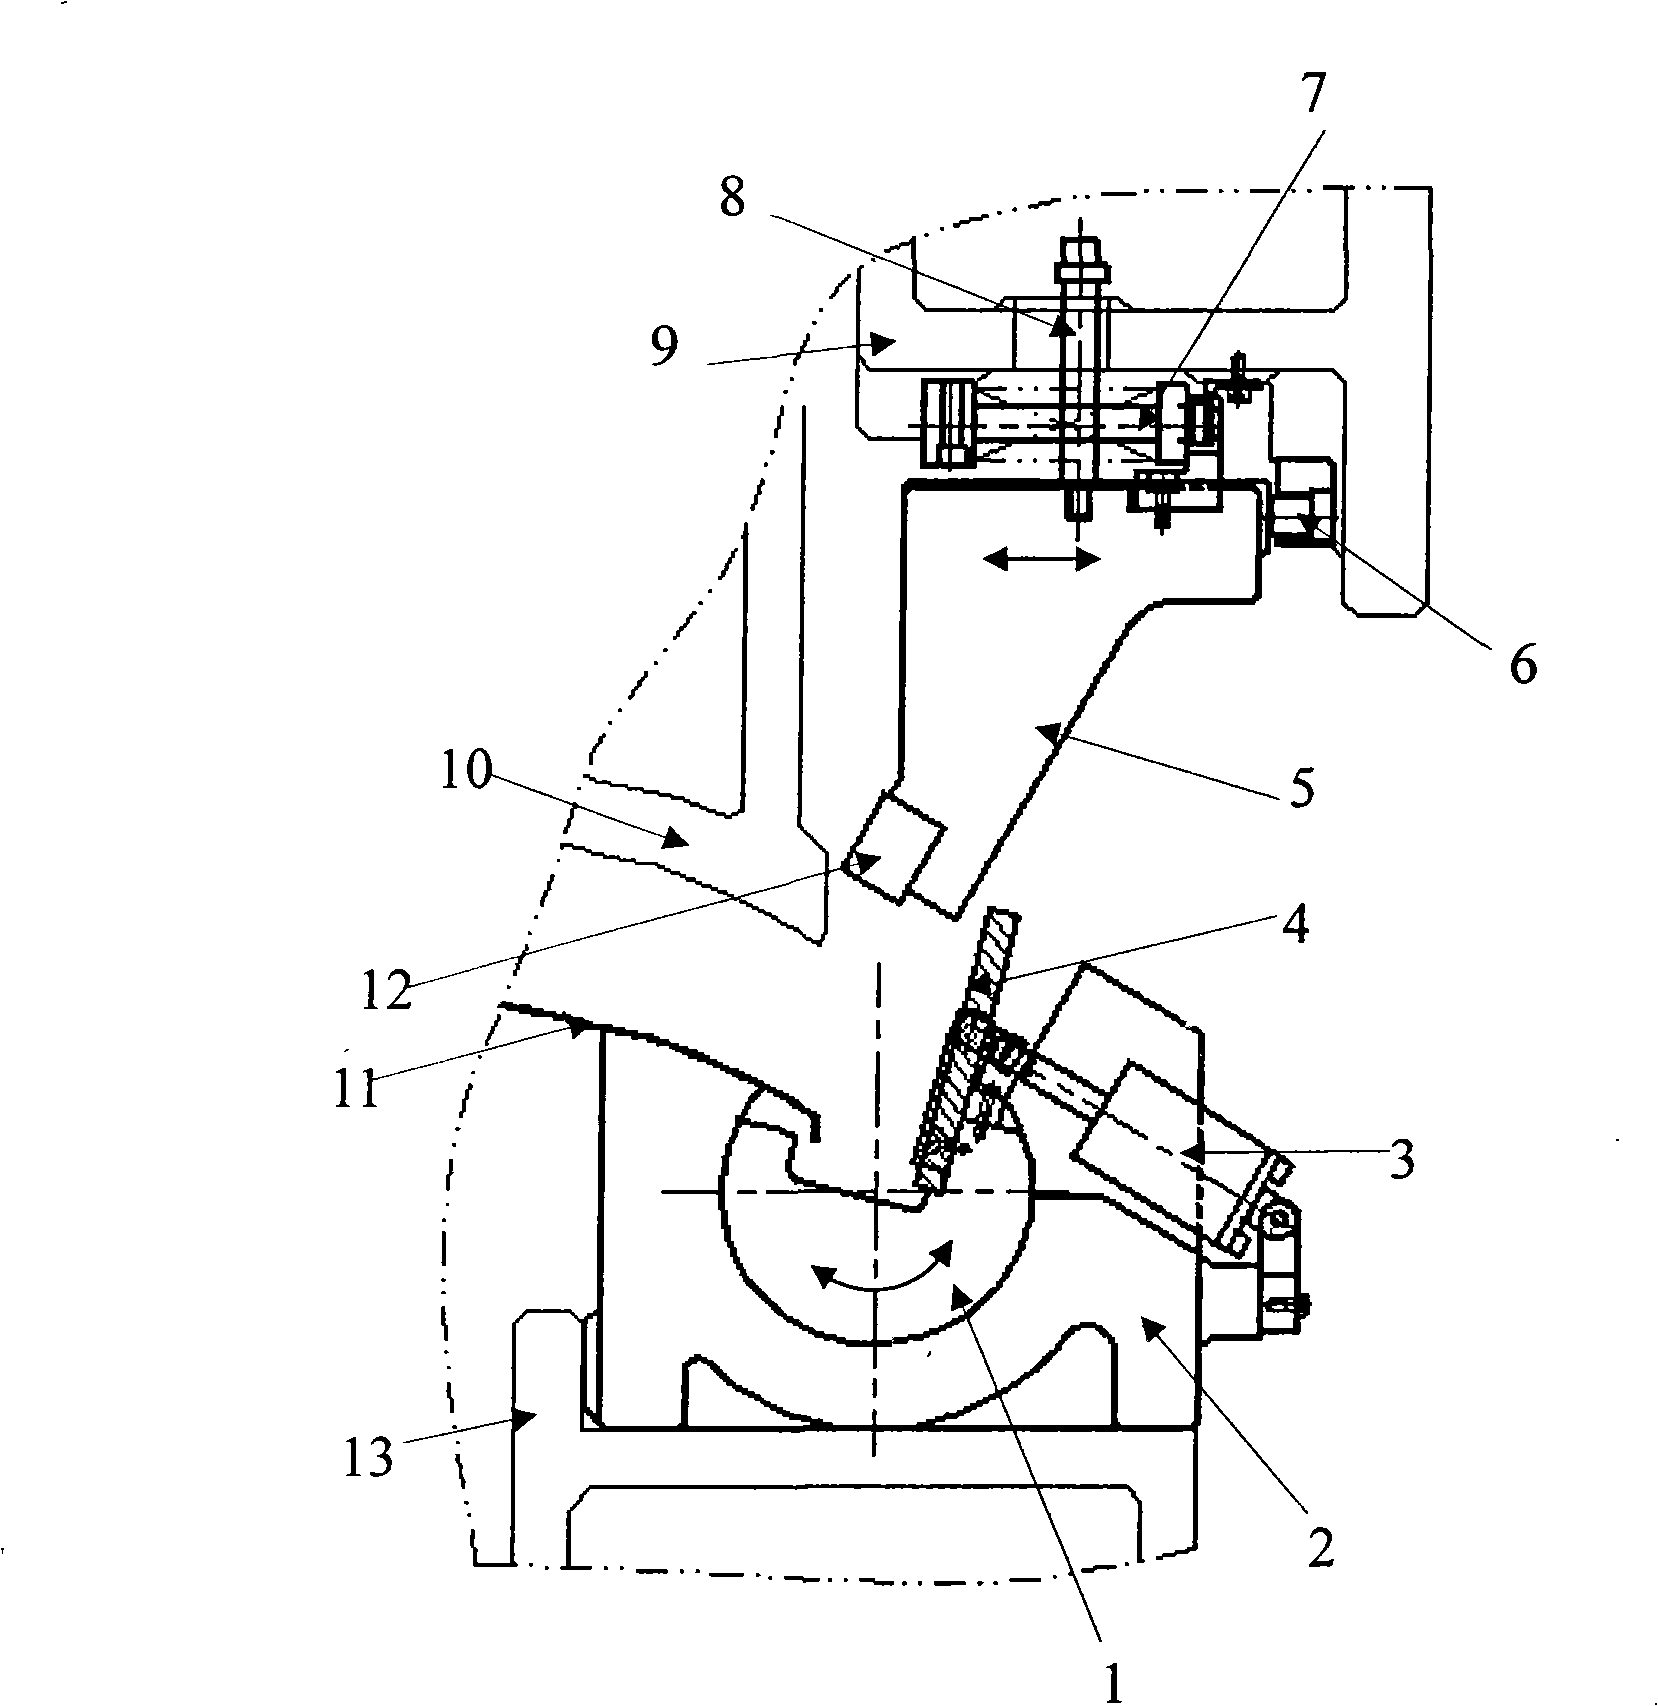 Mold for rotating flanging